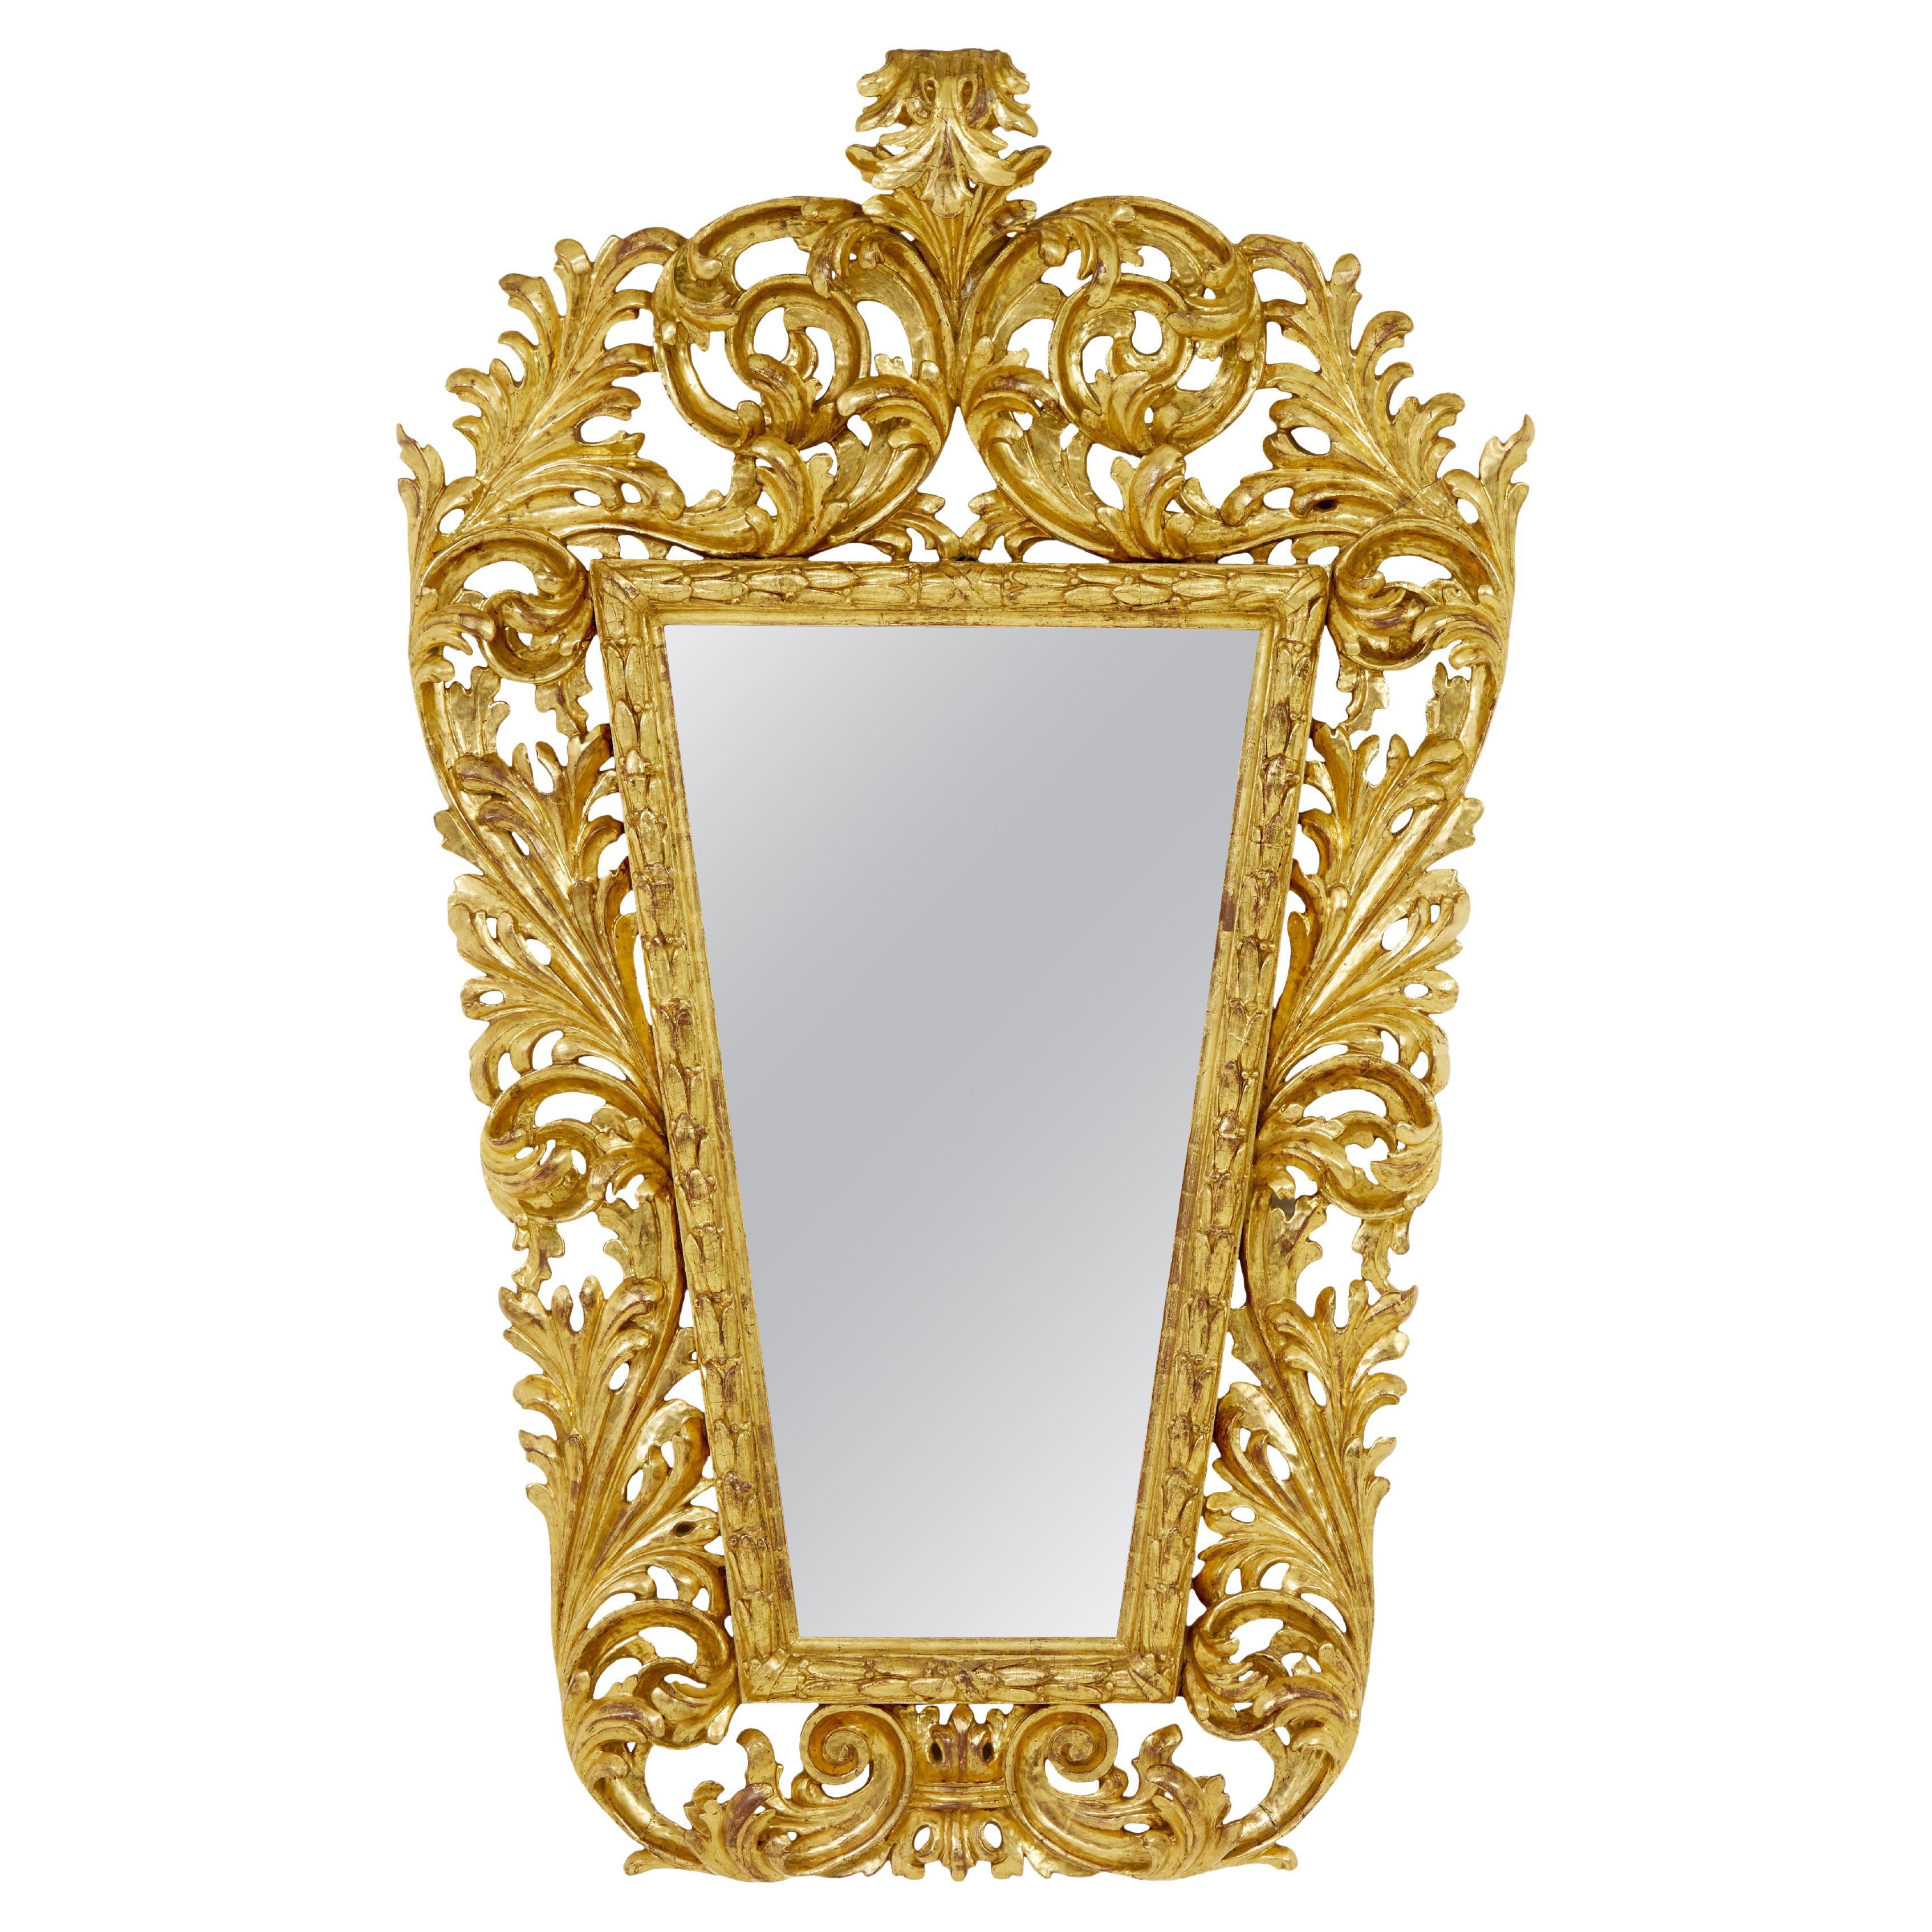 18th century carved Italian rococo giltwood mirror For Sale